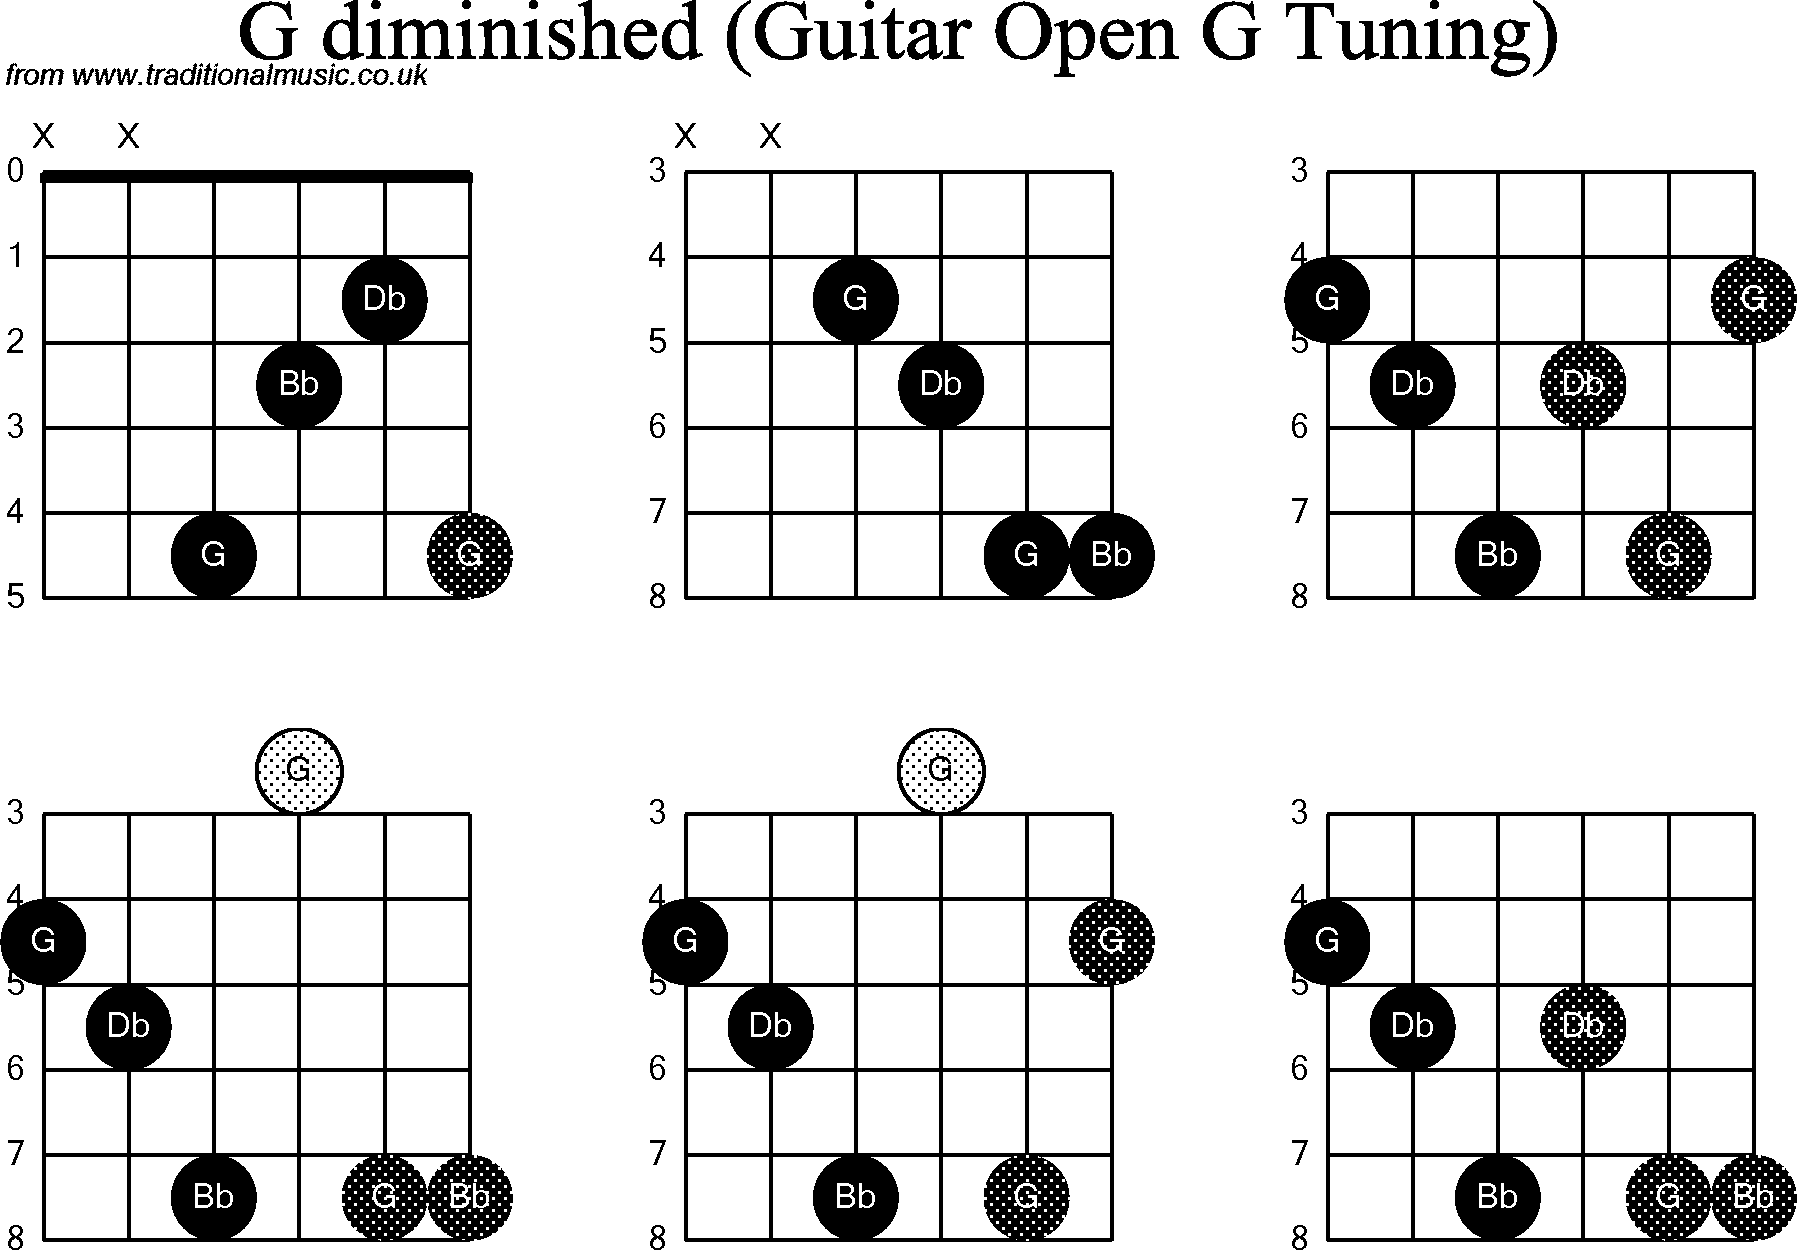 Chord diagrams for Dobro G Diminished